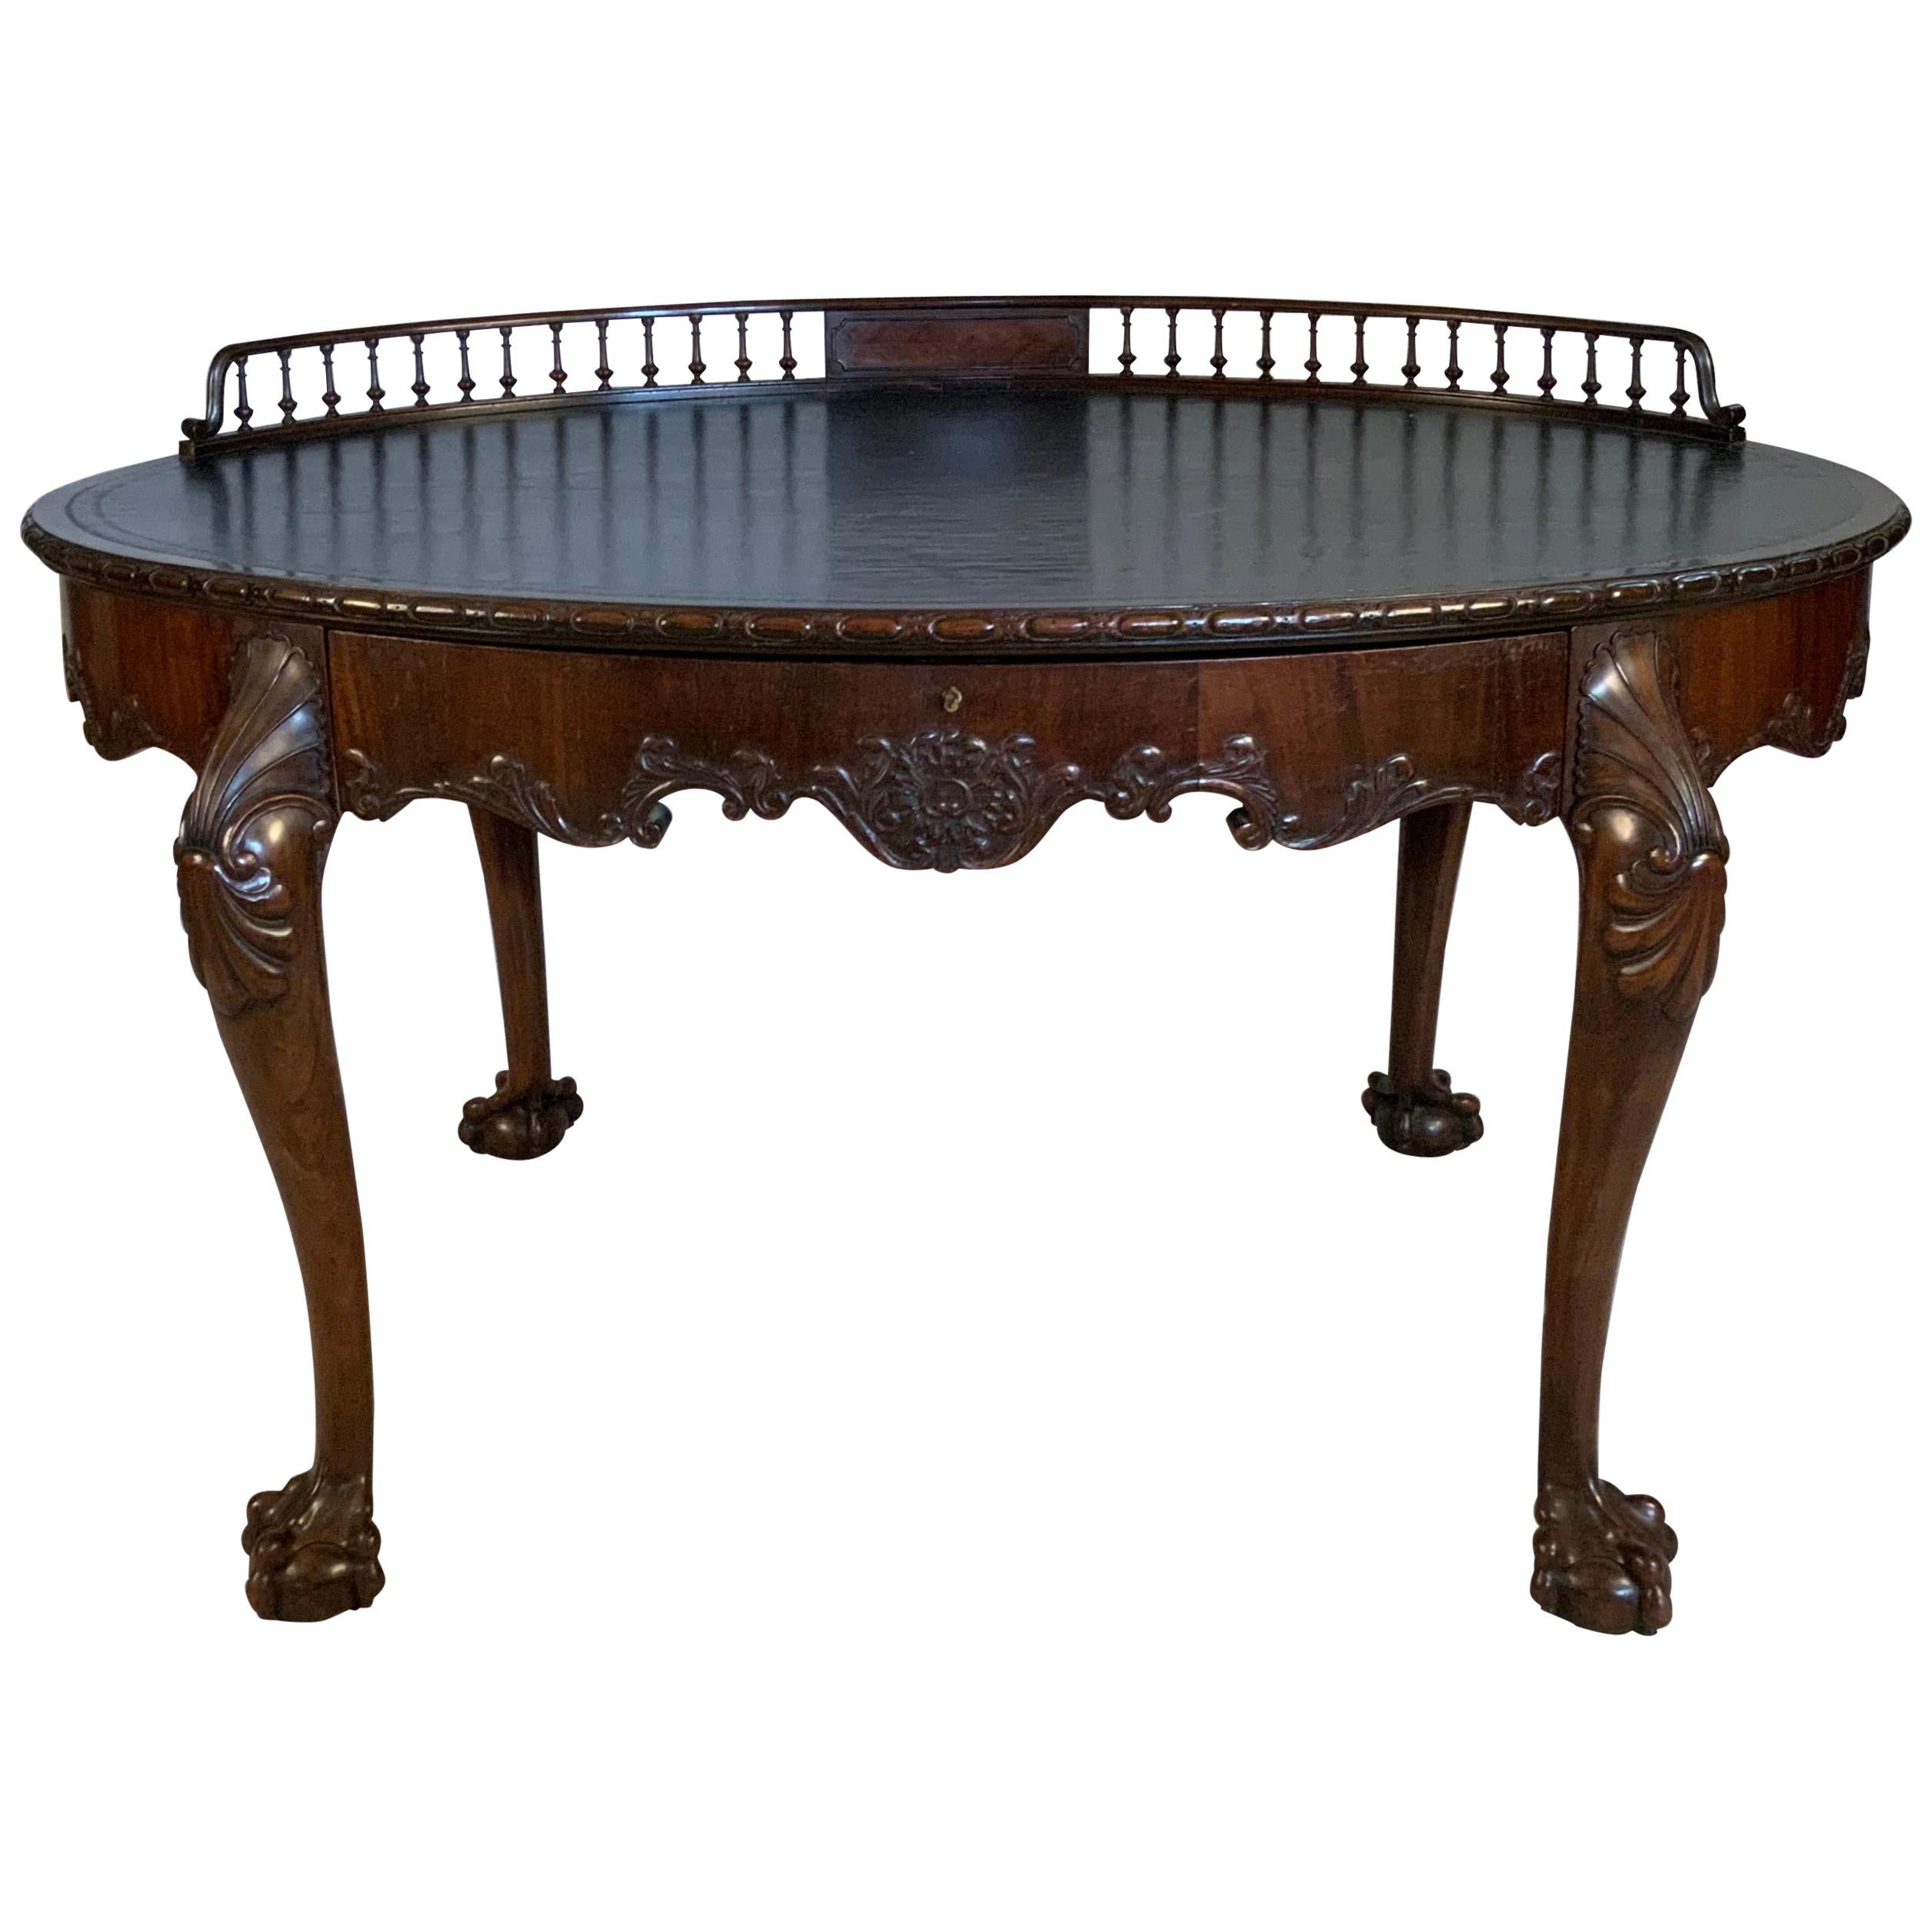 A beautiful mid-19th century English oval writing desk, with nicely carved ball and claw feet, a leather top with subtle greek key pattern around the edge, and a lovely gallery rail around the back. a single wide drawer in the front, with its